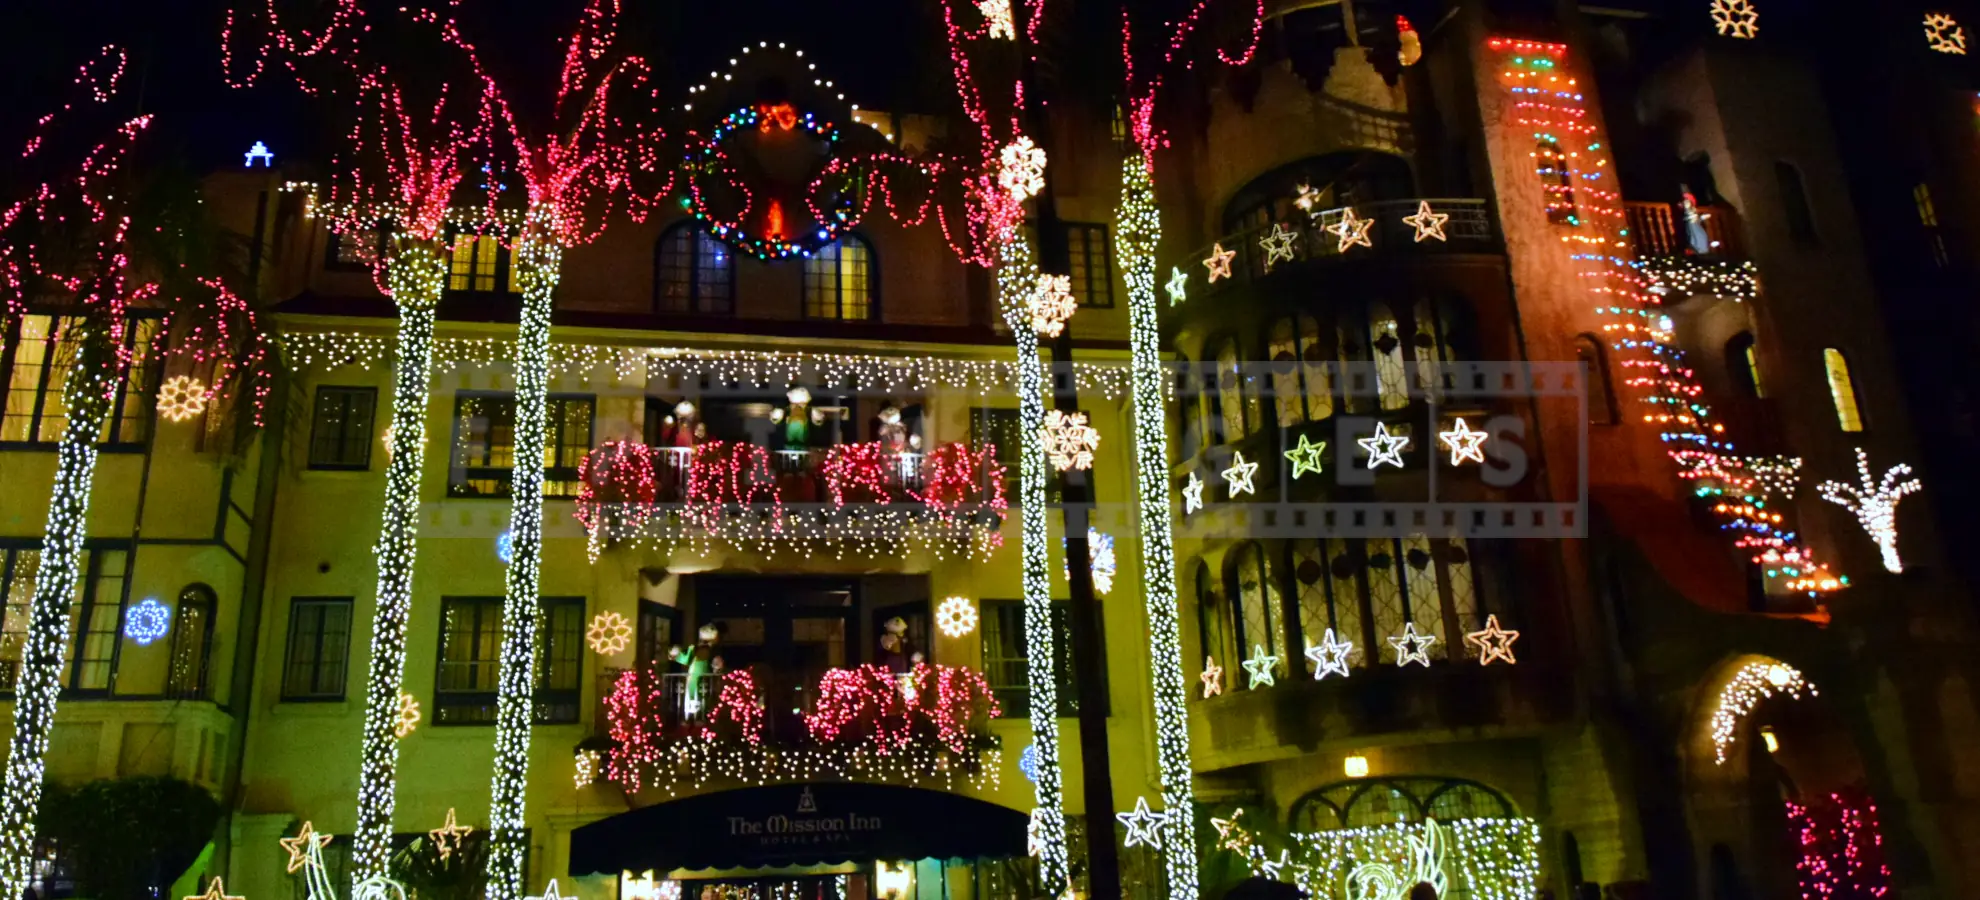 The Mission Inn entrance with decorations for Festival of Lights